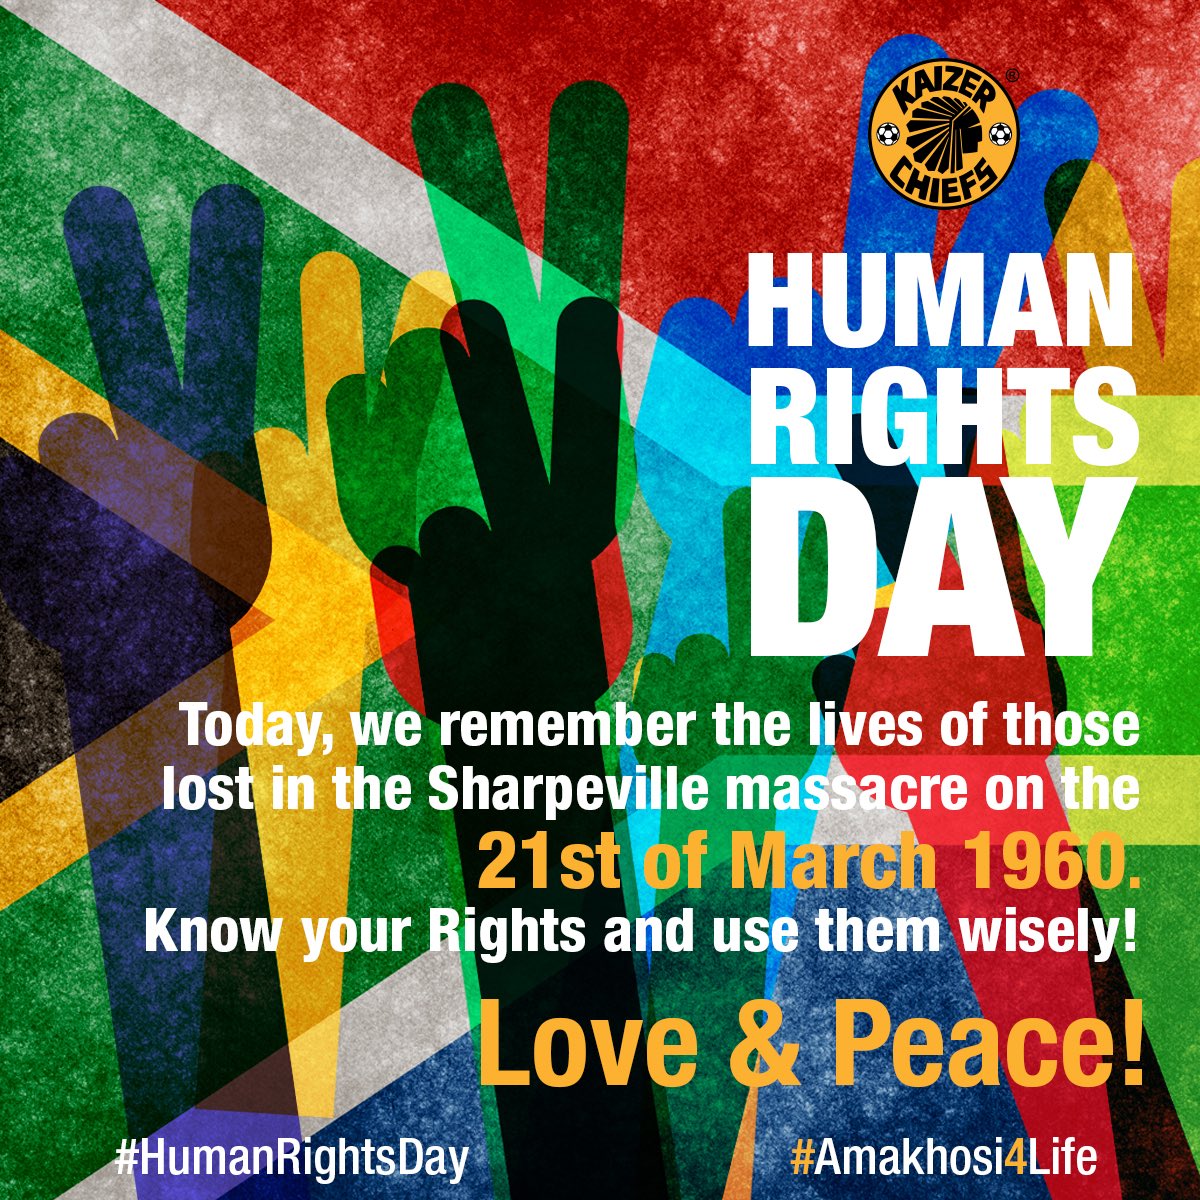 Kaizer Chiefs Human Rights Day We Still Remember Those That Sacrificed Their Lives On This Day In 1960 Humanrightsday Amakhosi4life T Co L46znqfacl Twitter